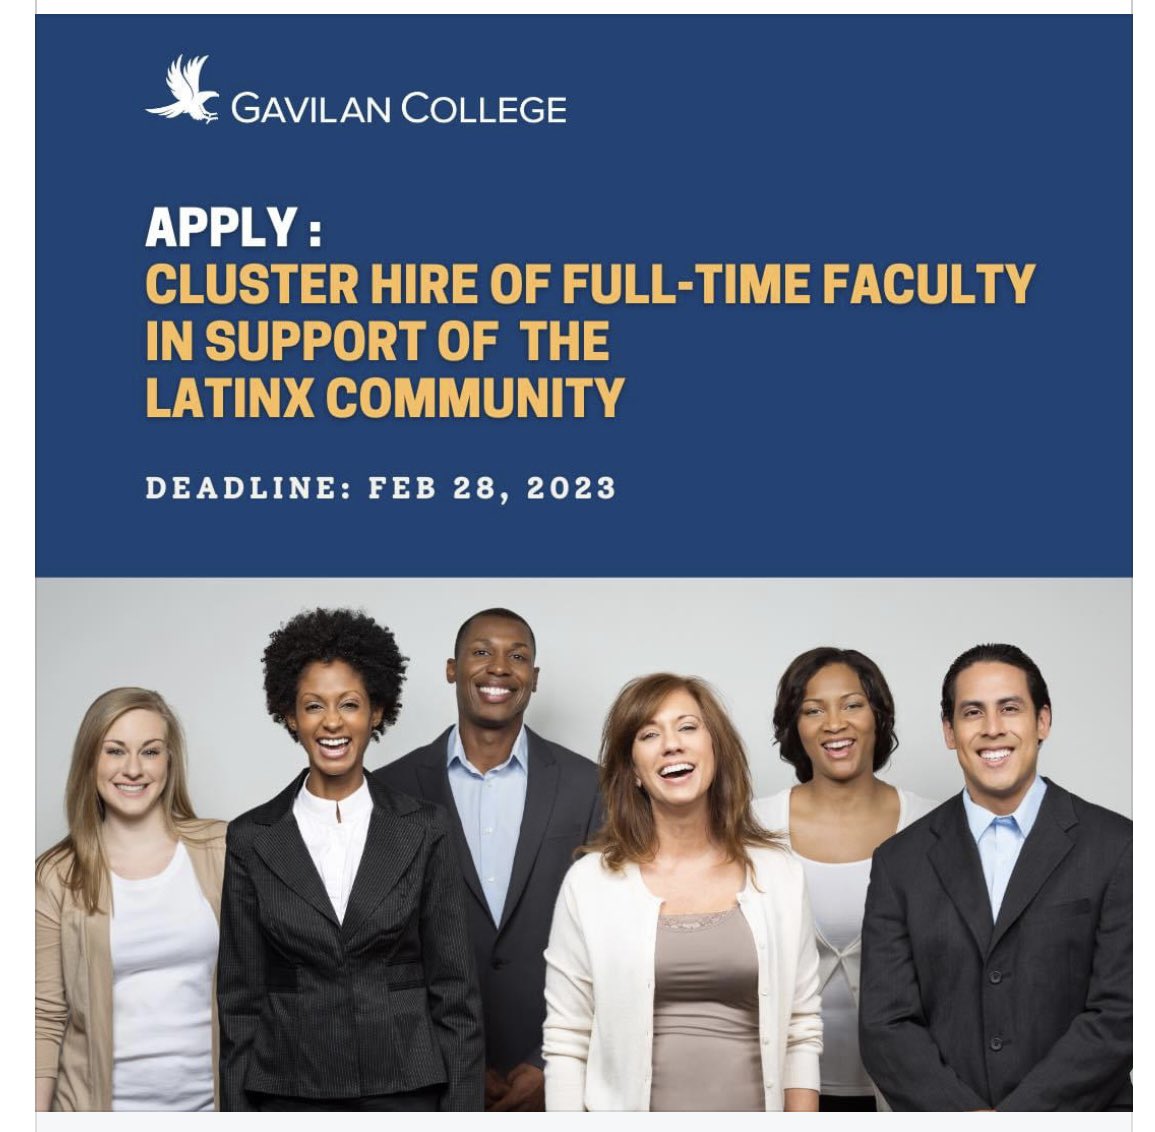 So proud of President Pedro Avila of @GavilanCollege hiring full-time faculty w a demonstrated history of working with & supporting Latinx Students to deepen commitment to racial equity APPLY go HERE: bit.ly/GavCluster. Deadline is February 28, 2023!